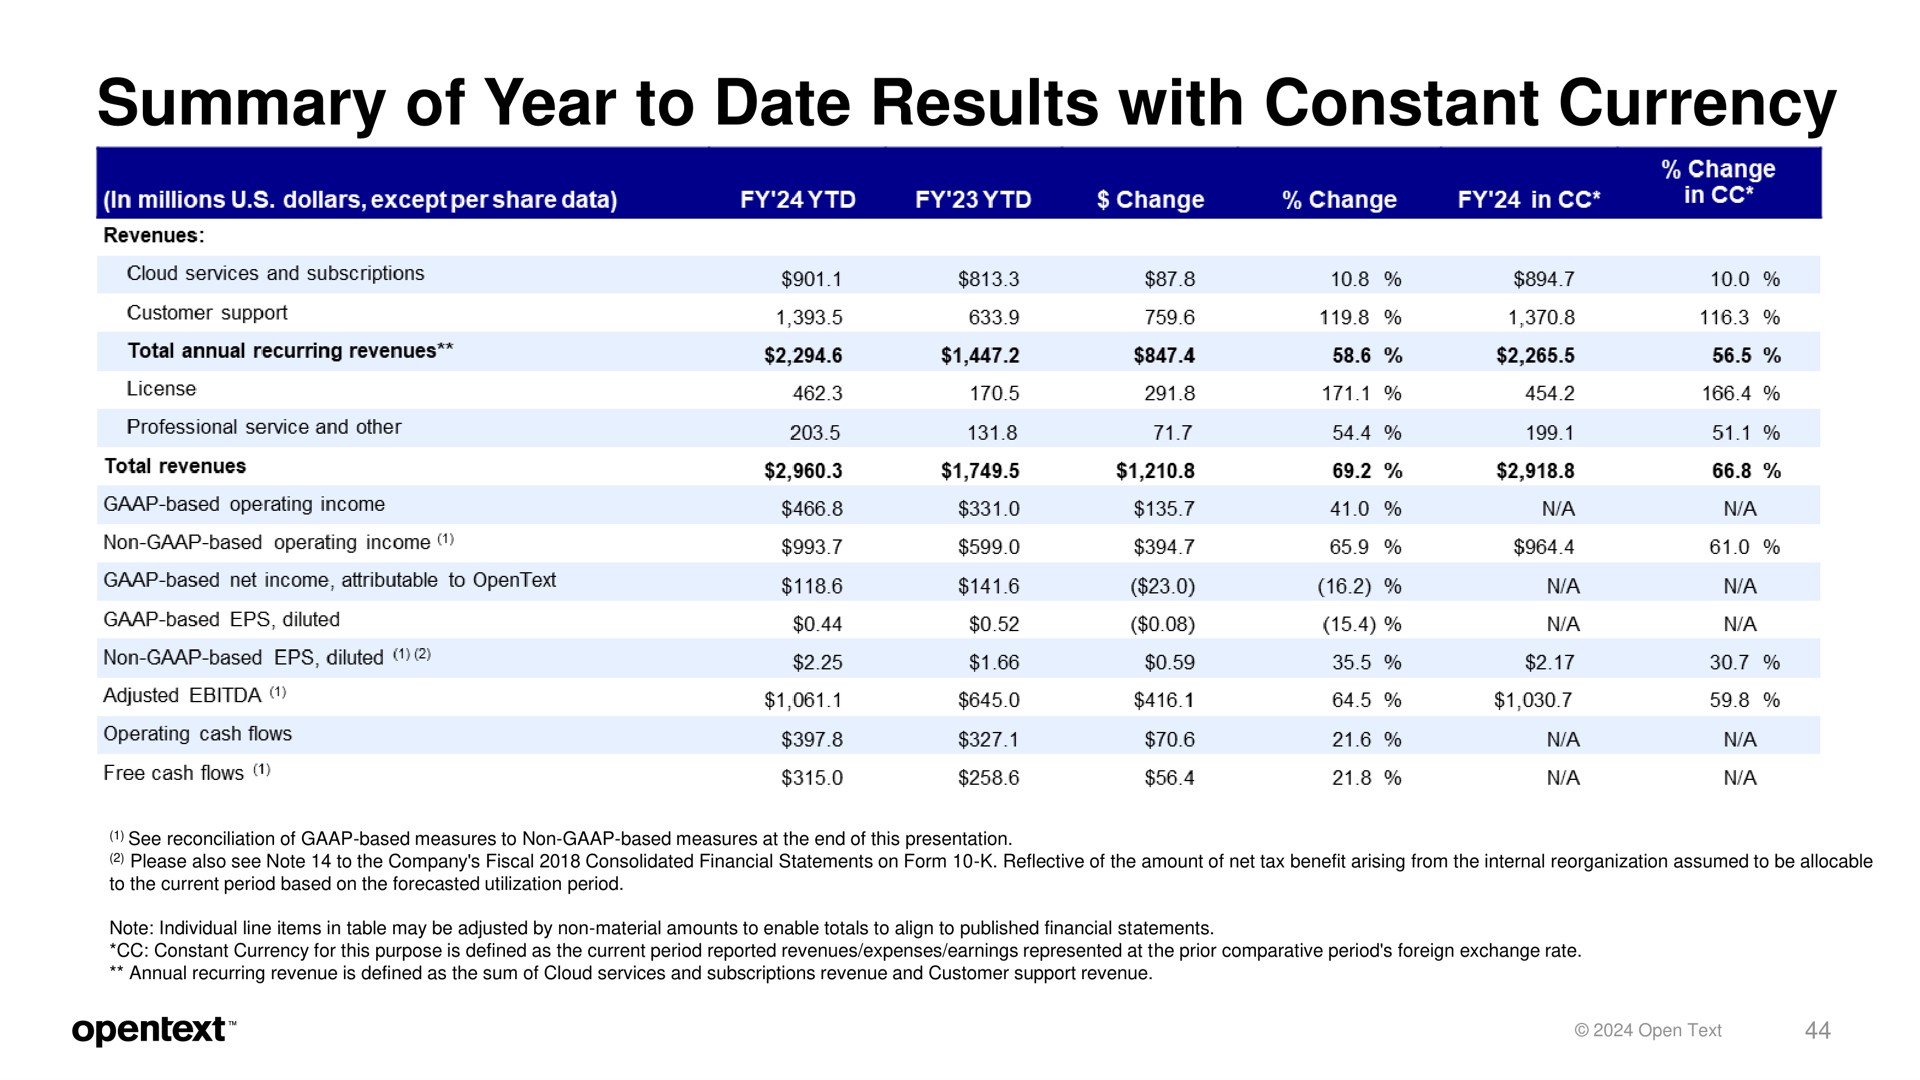 summary of year to date results with constant currency | OpenText